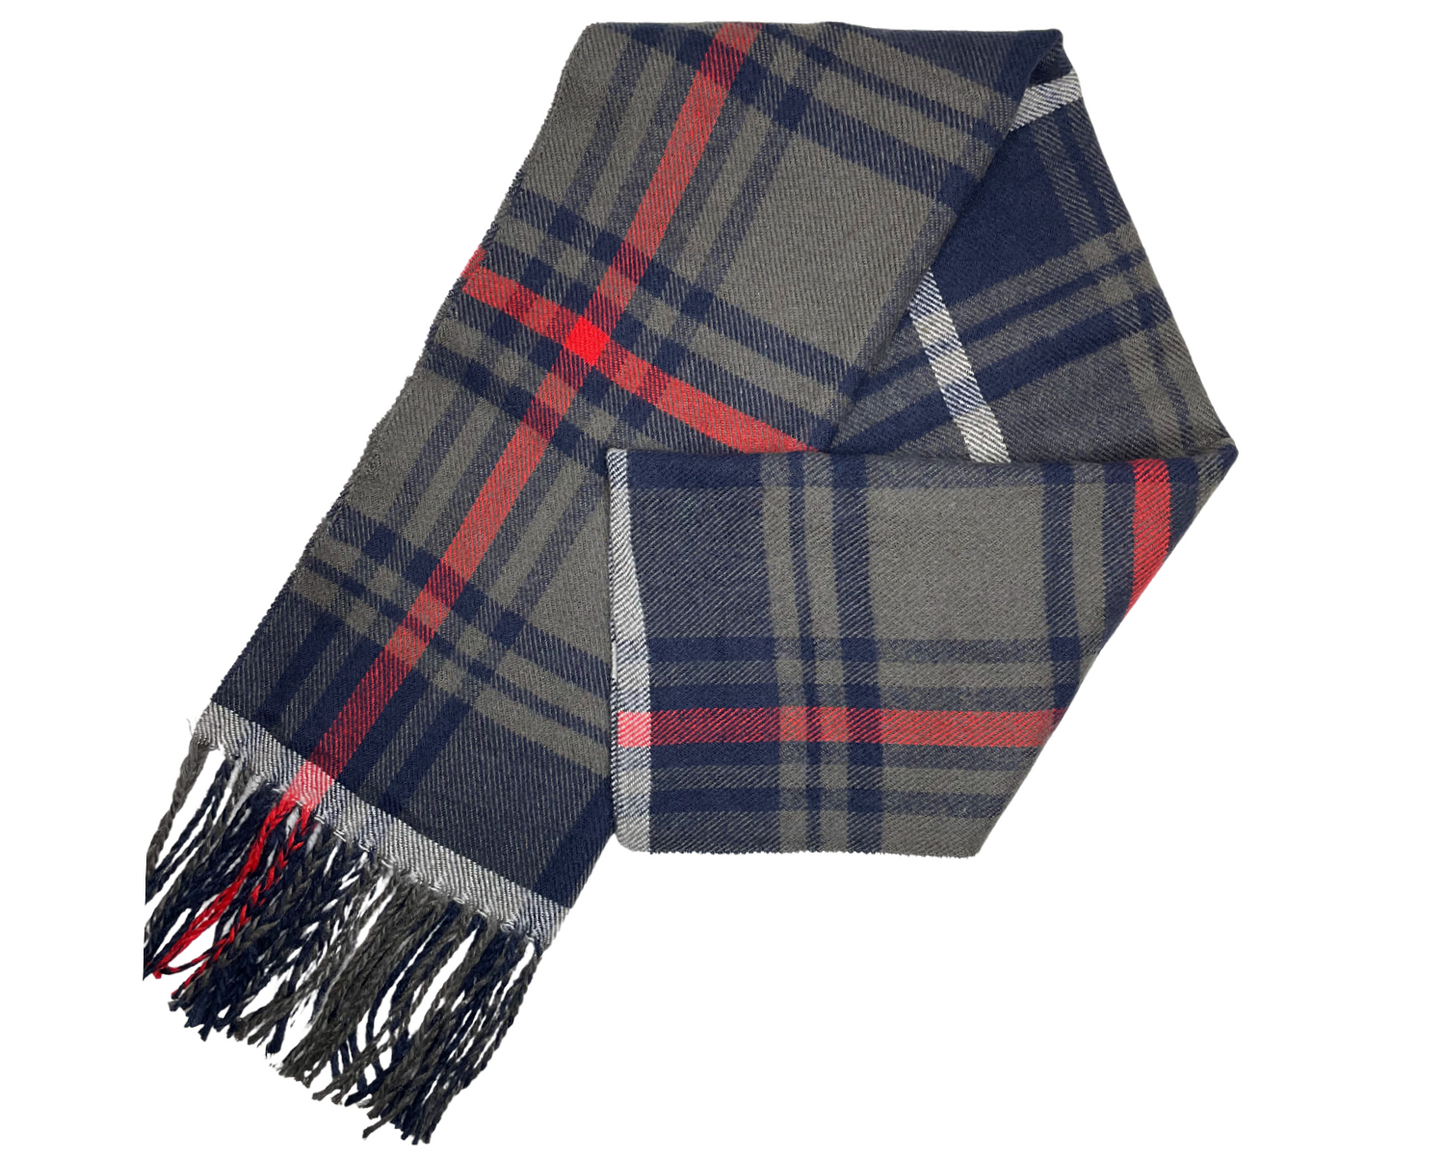 #color_ Navy Grey and Red | Relhok Plaid Scarf - Navy Grey and Red - 5_5a7dcf32-73e3-442d-b085-bdeccf897049